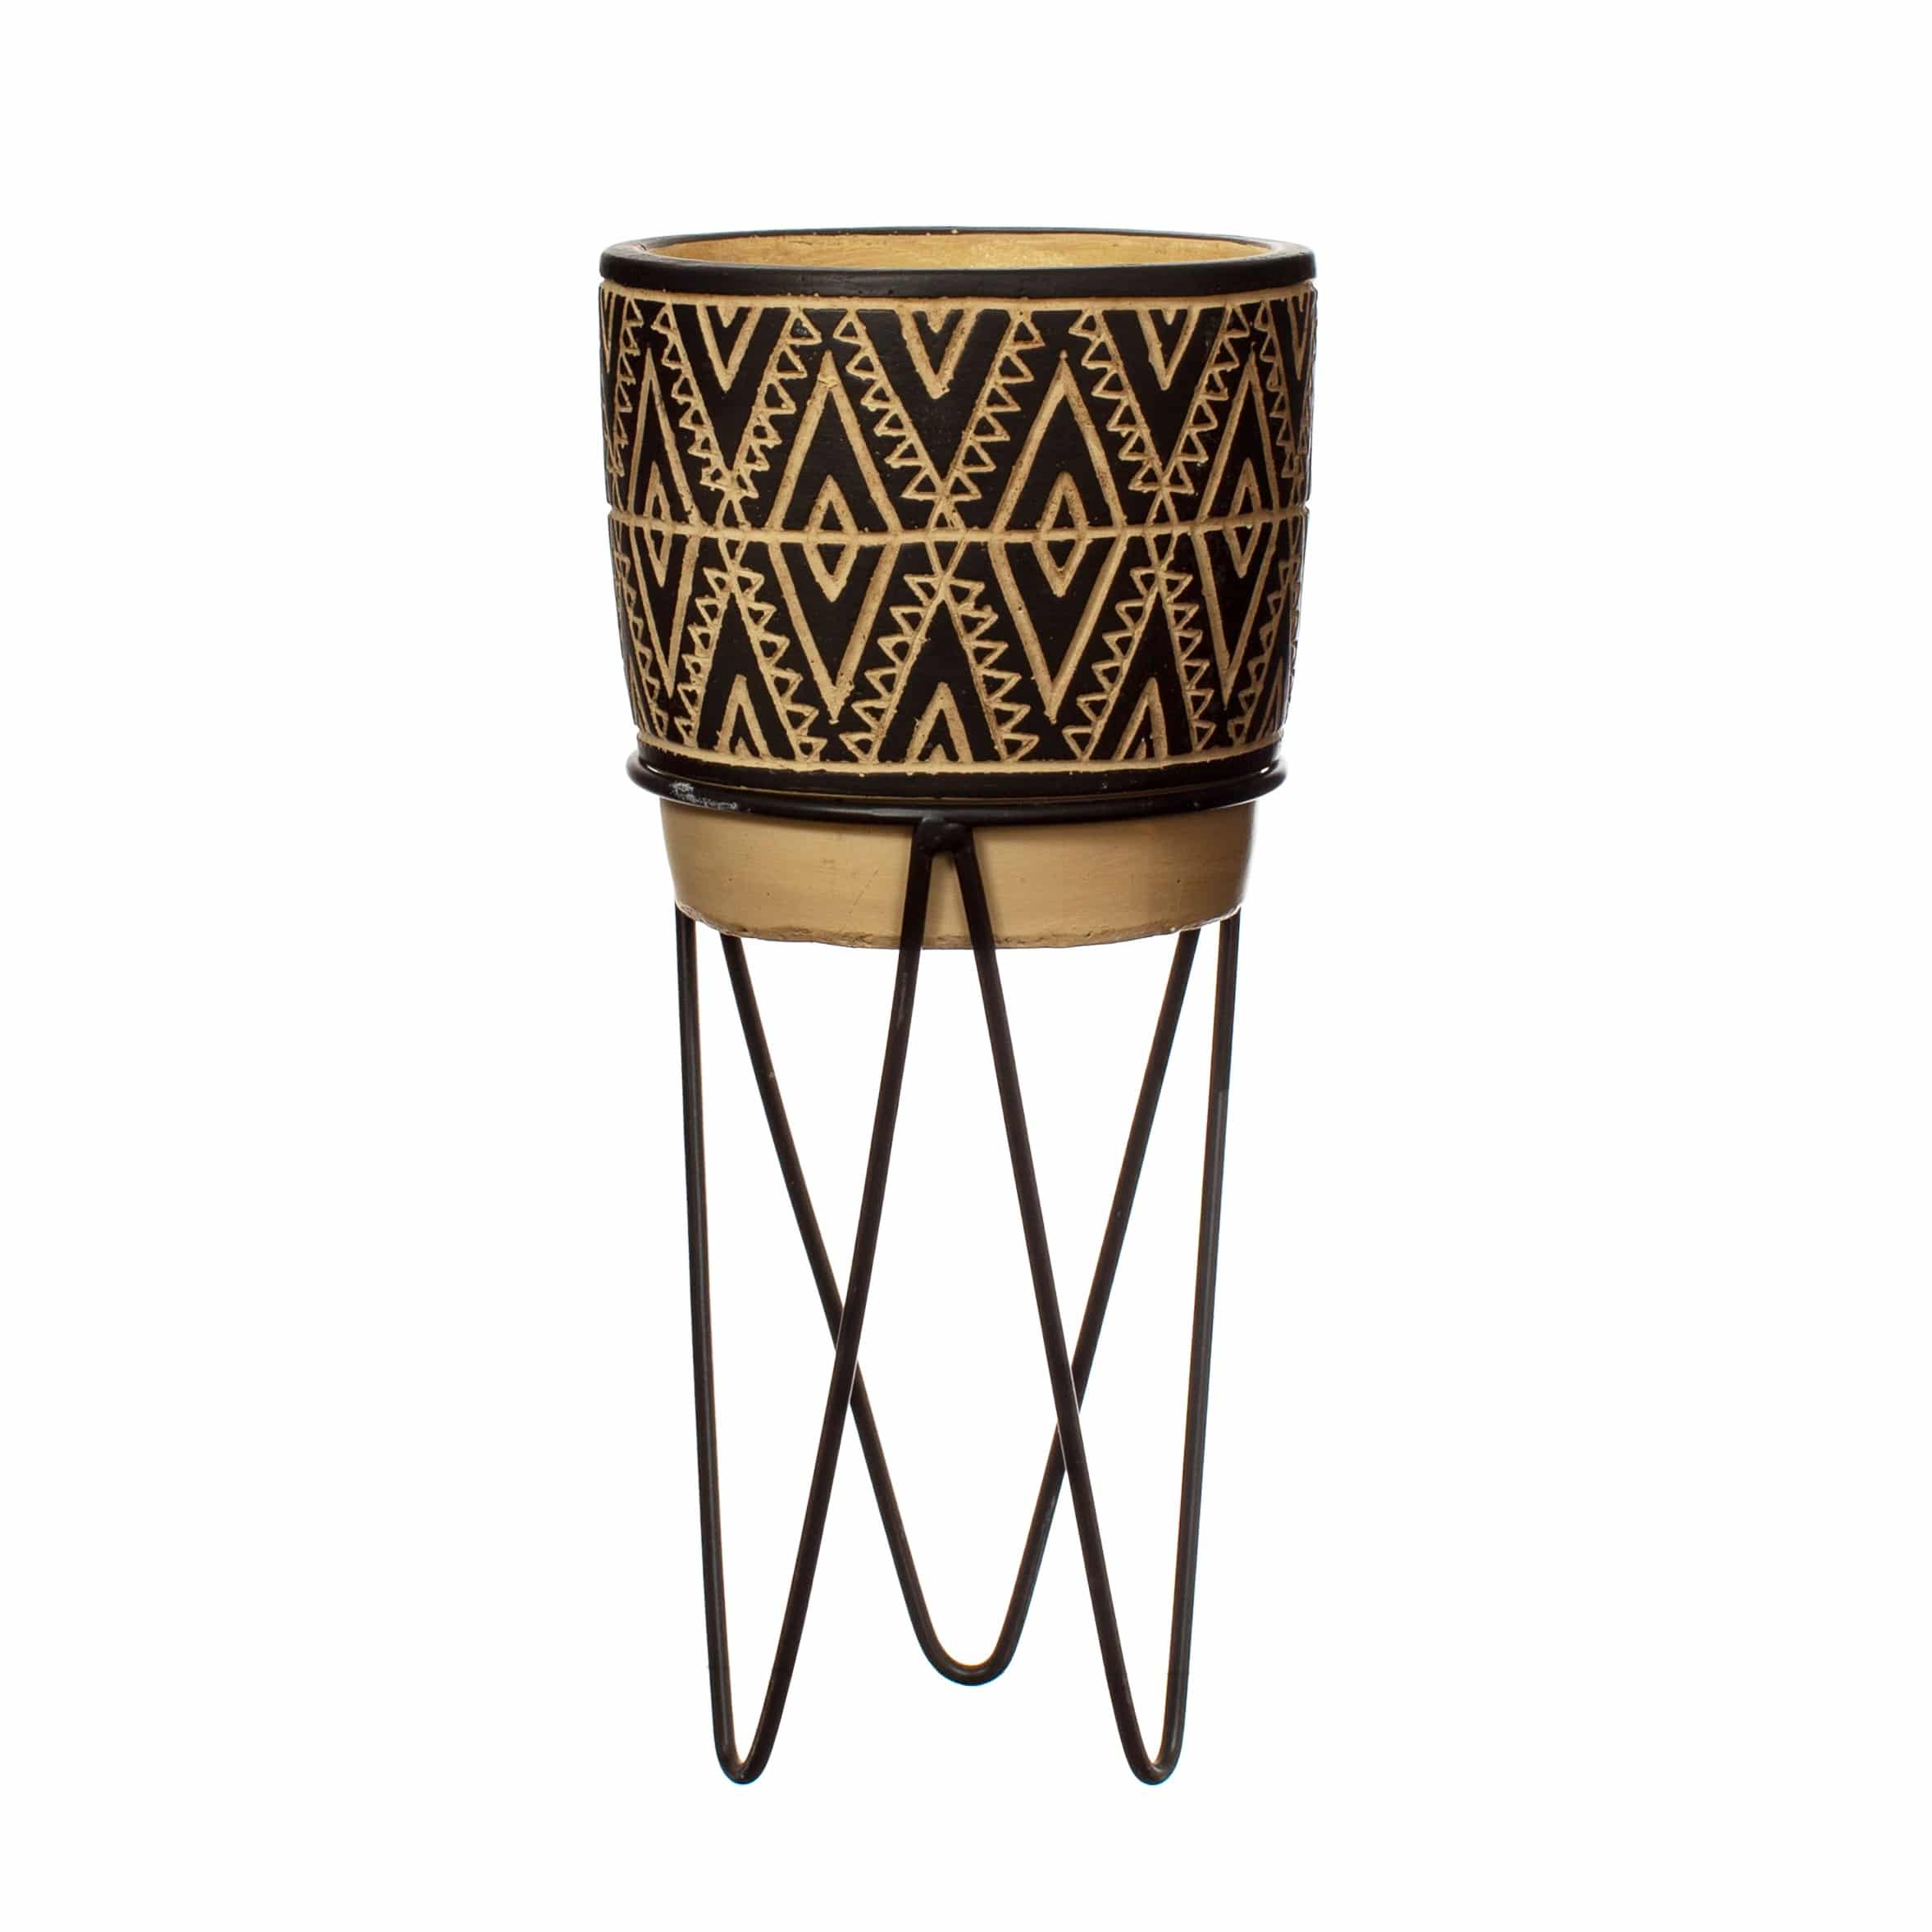 Patterned Plant Pot with Fitted Stand